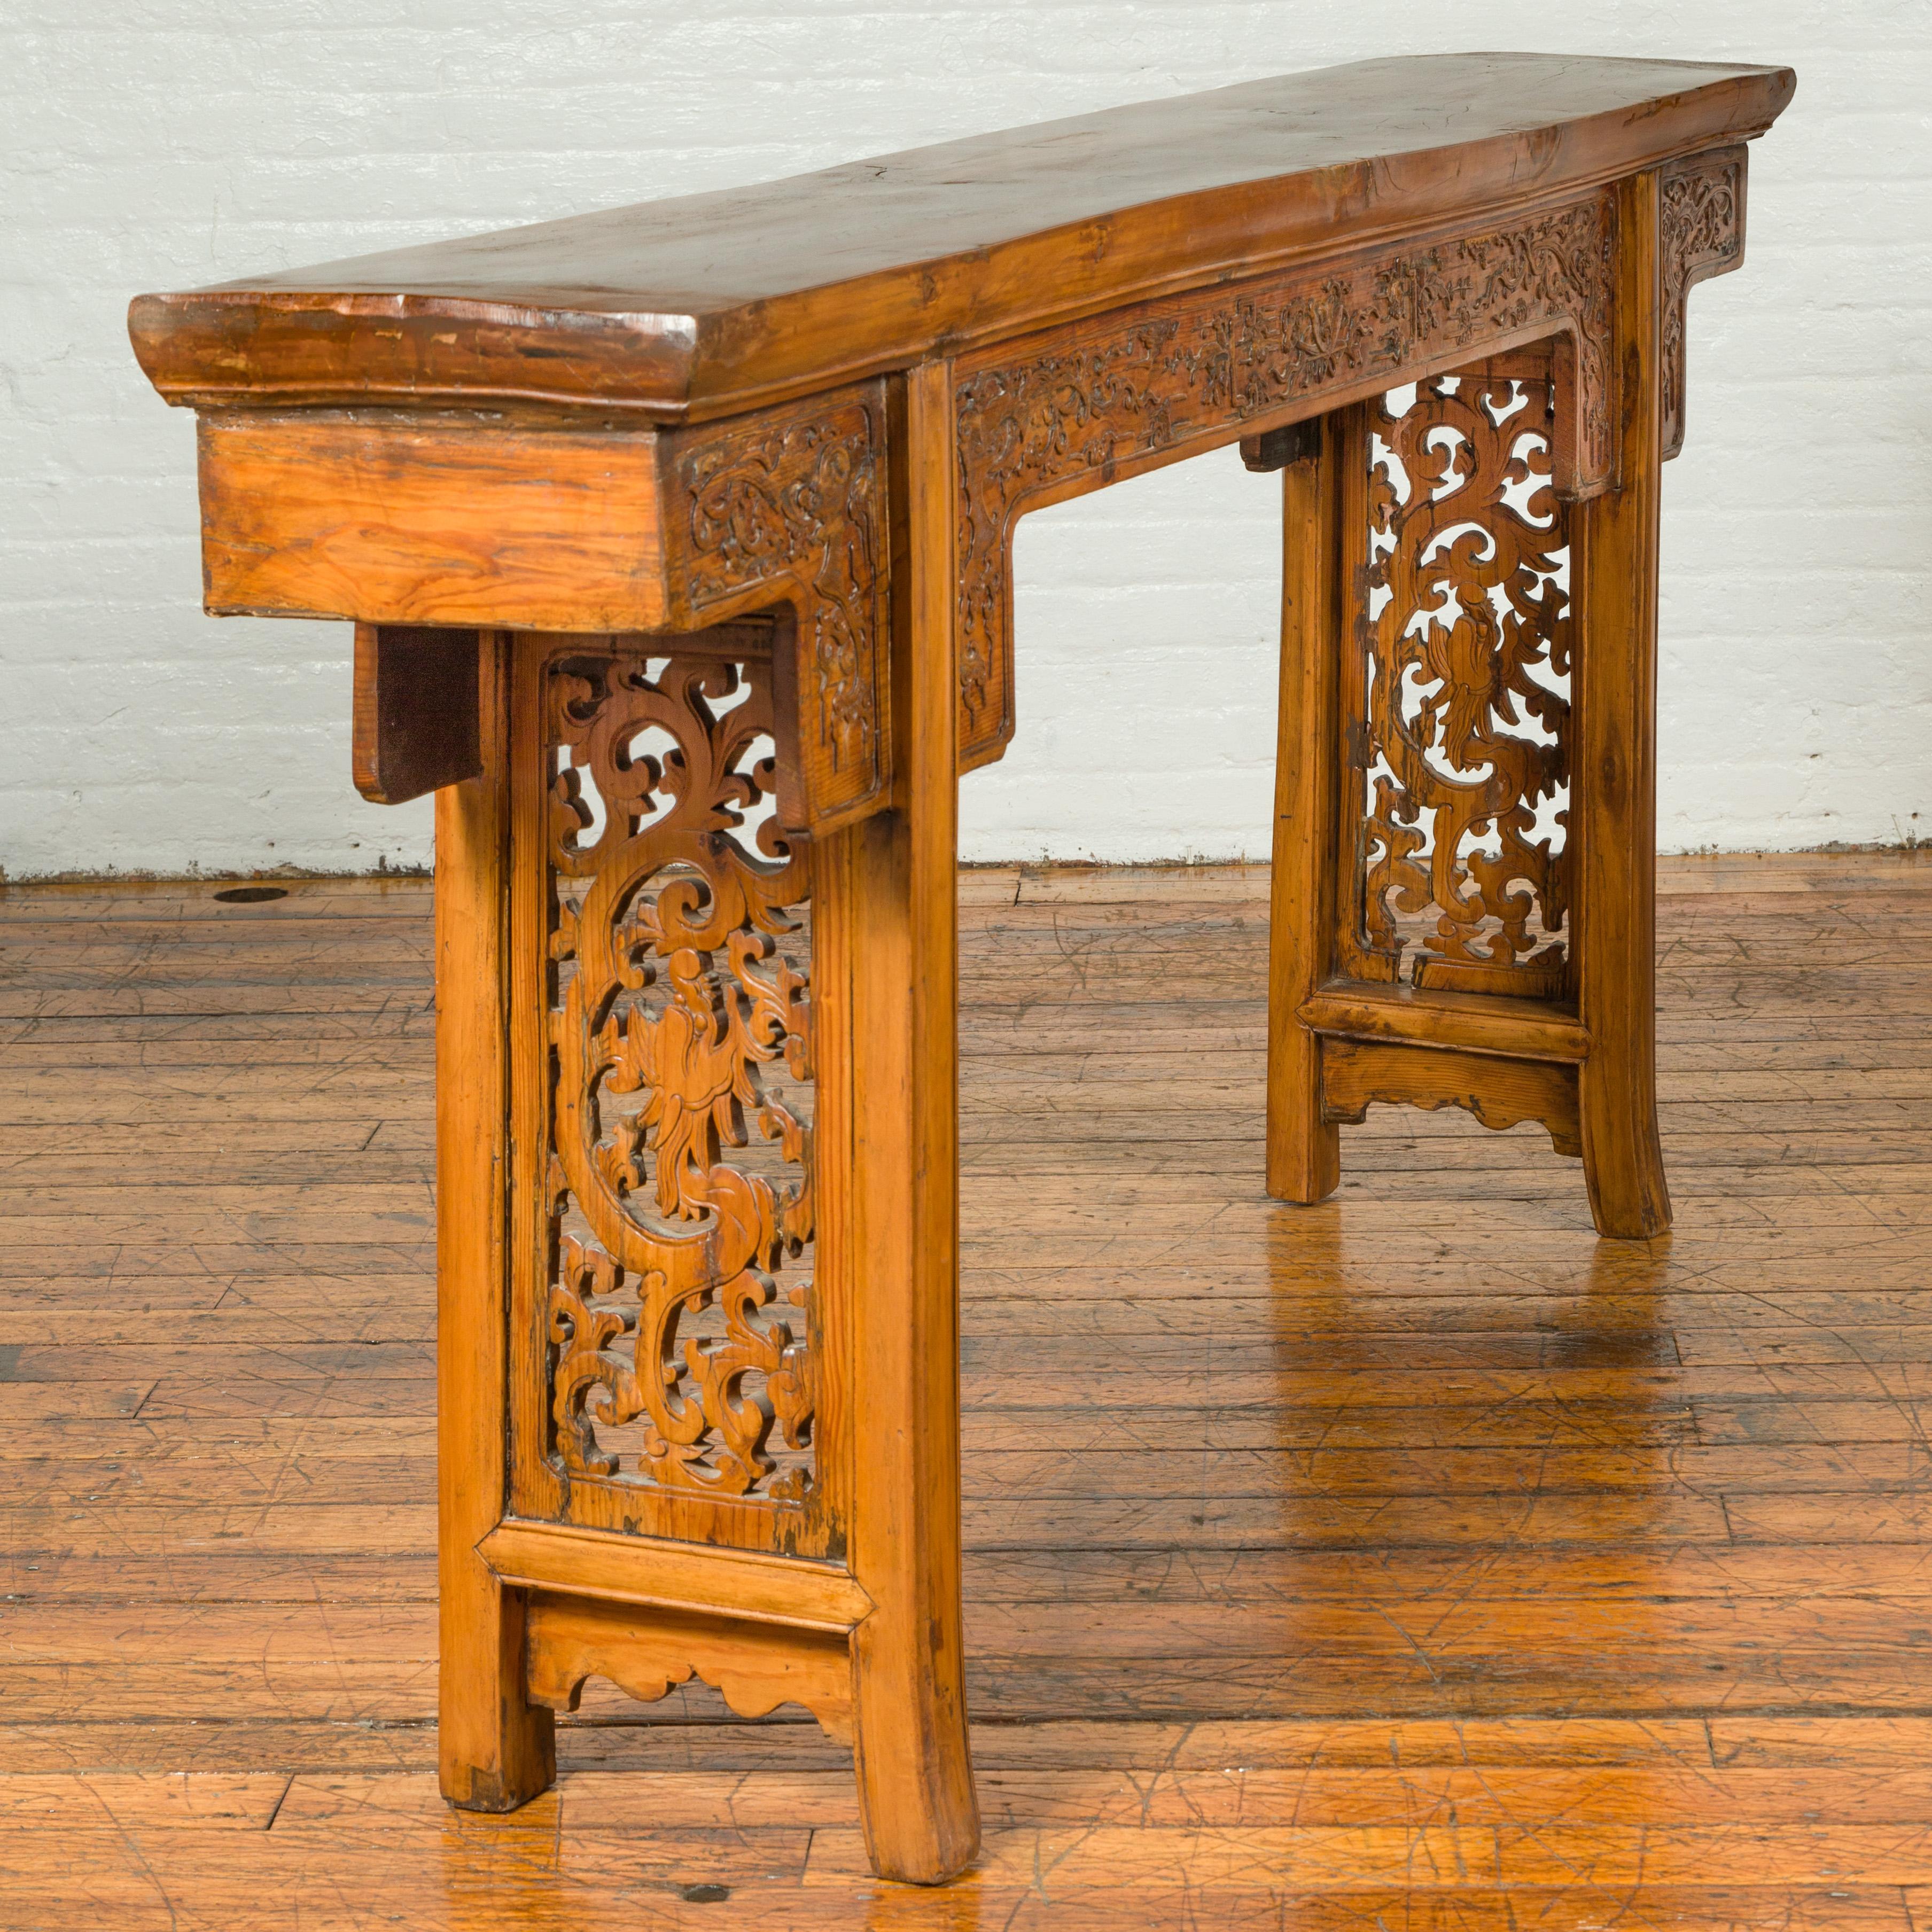 A Chinese Ming Dynasty style altar console table from the 19th century, with scrolls-carved apron, and open fretwork motifs. Attracting our attention with its elegant lines and skilfully carved décor, this Chinese Ming Dynasty style console altar